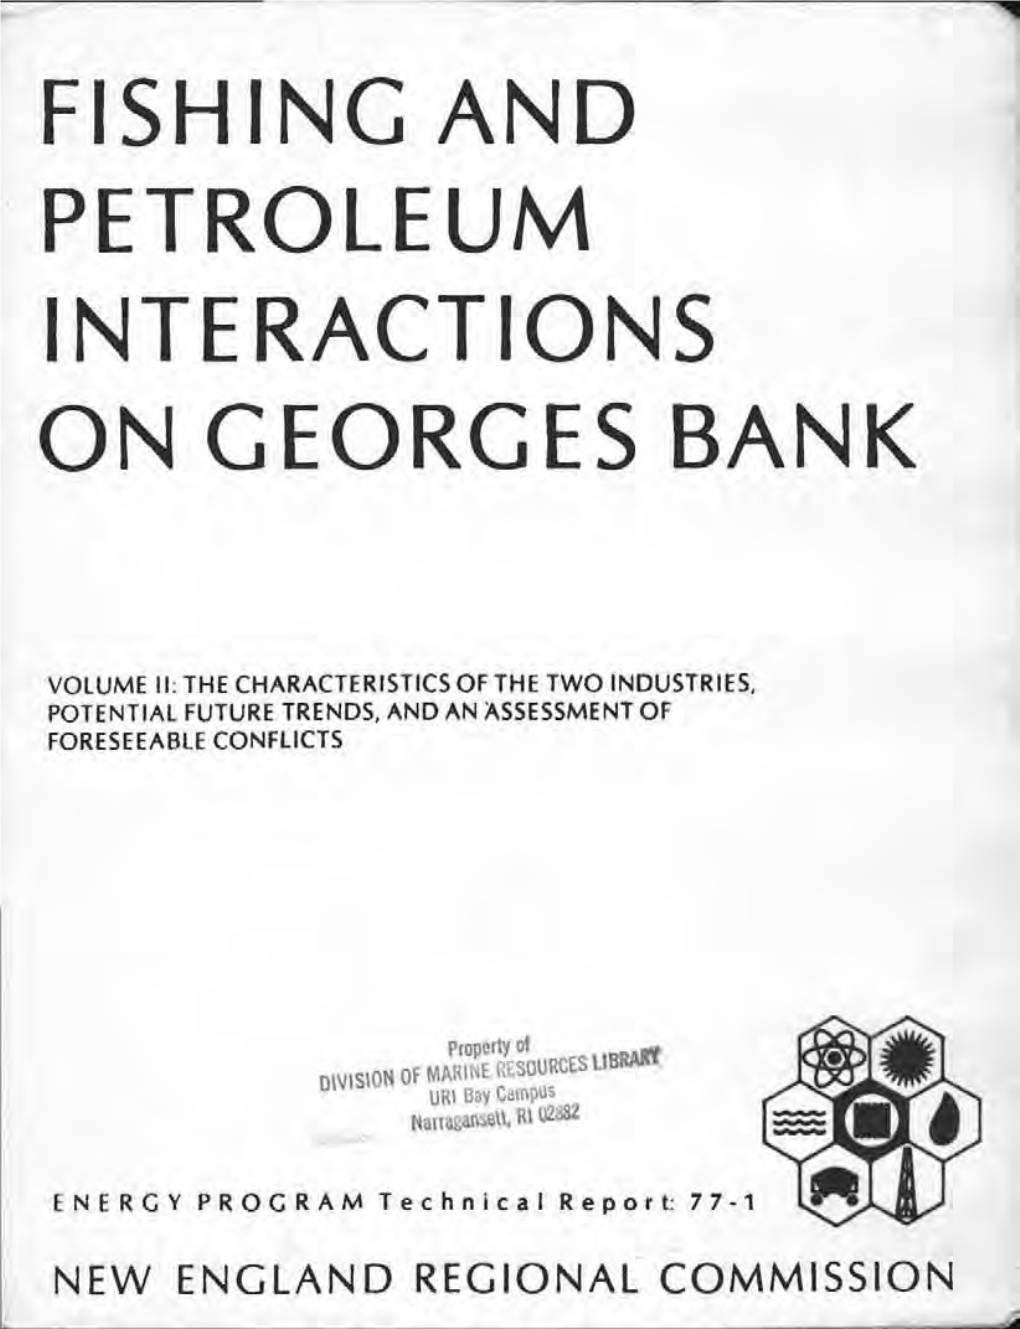 Fishing and Petroleum Interactions on Georges Bank Volume II